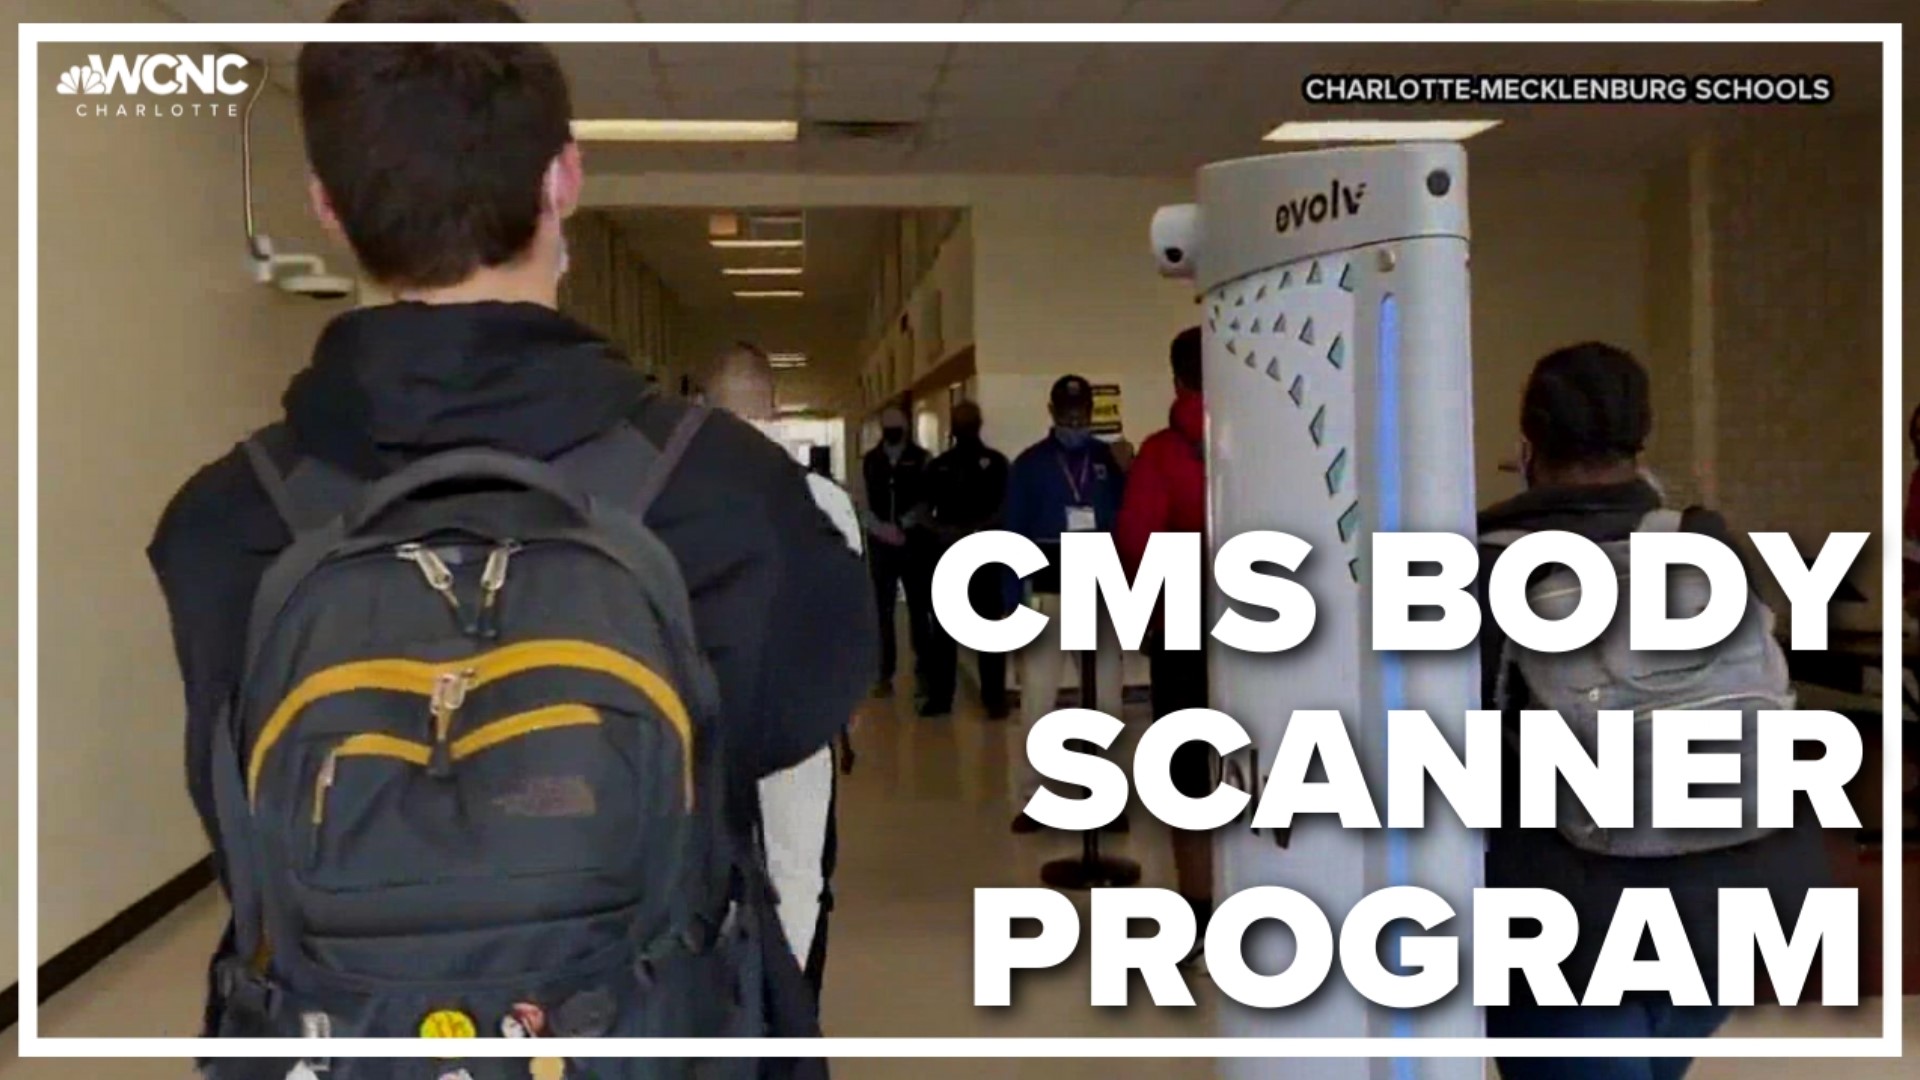 It's been almost two months since the first body scanners went into some Charlotte Mecklenburg schools.